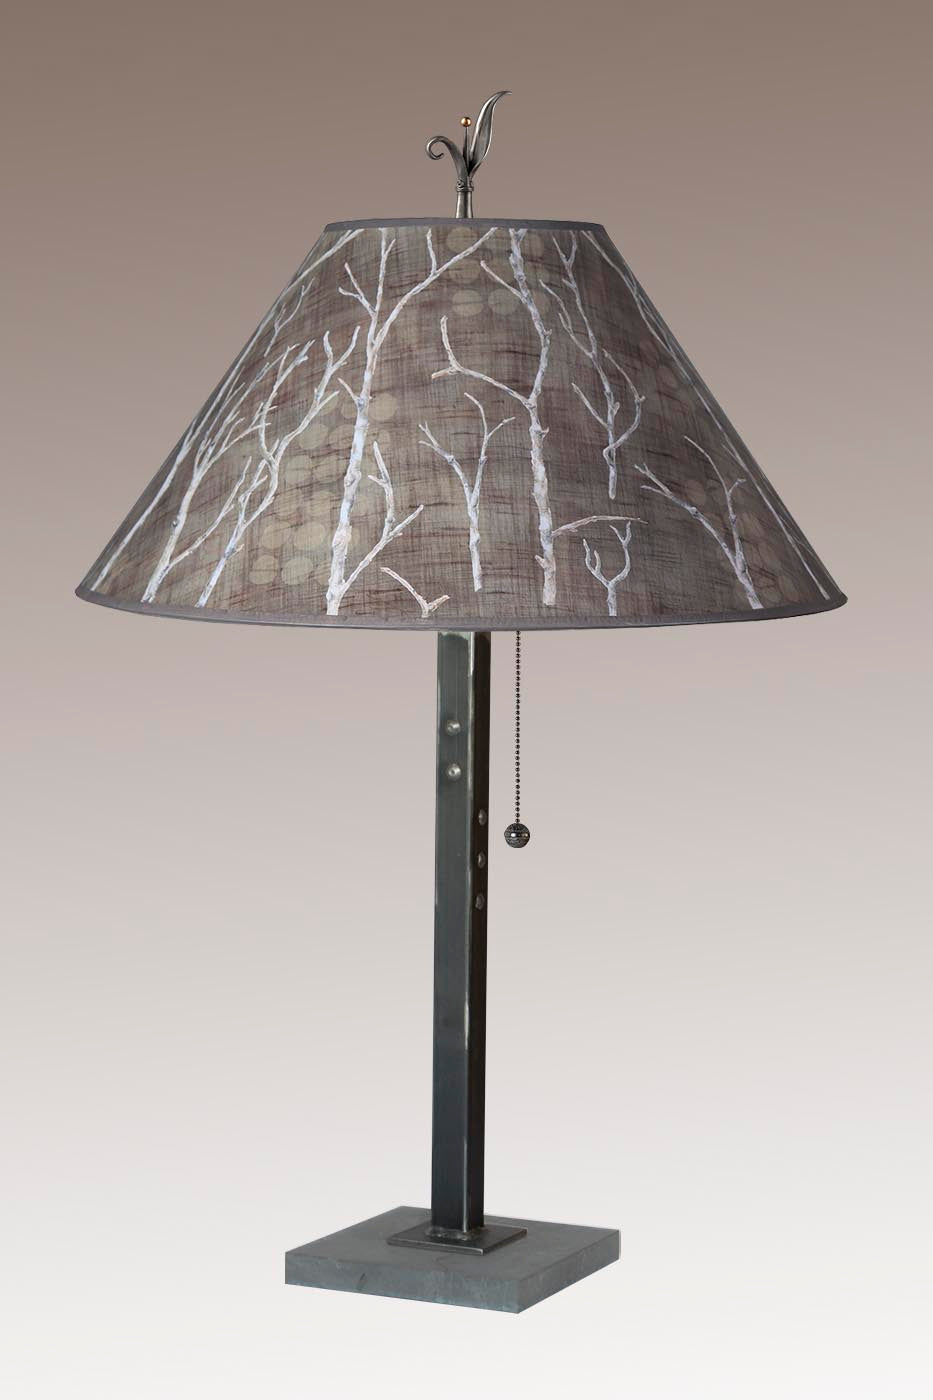 Janna Ugone & Co Table Lamp Steel Table Lamp with Large Conical Shade in Twigs